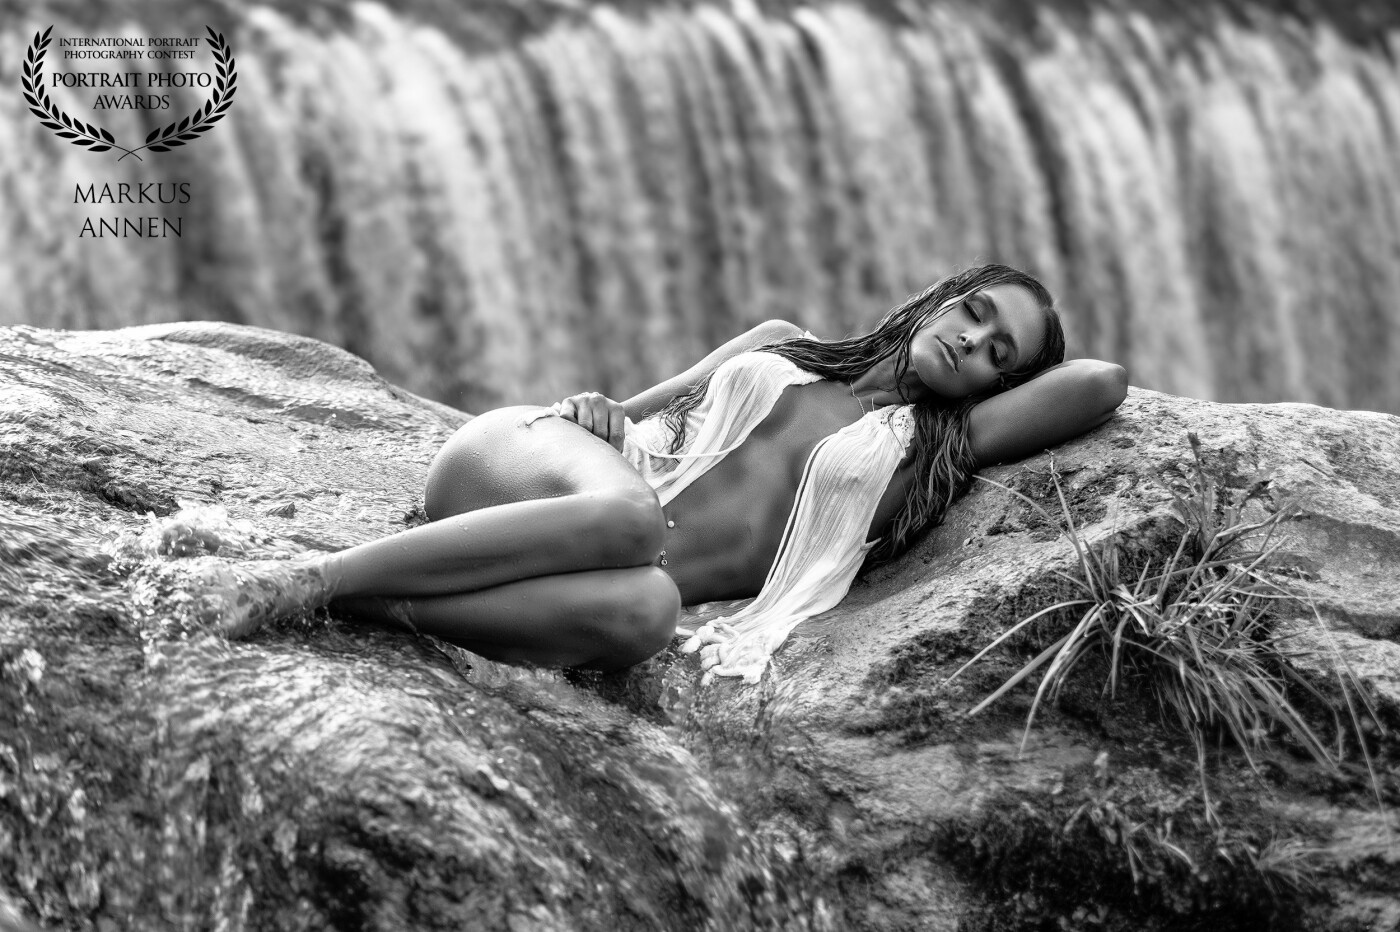 This was an early morning photo shoot with the lovely Diana near a popular waterfall in Switzerland. The picture is an expression of calmness and beauty and I am very thankful for Diana's patience and perseverance during the whole photoshooting.